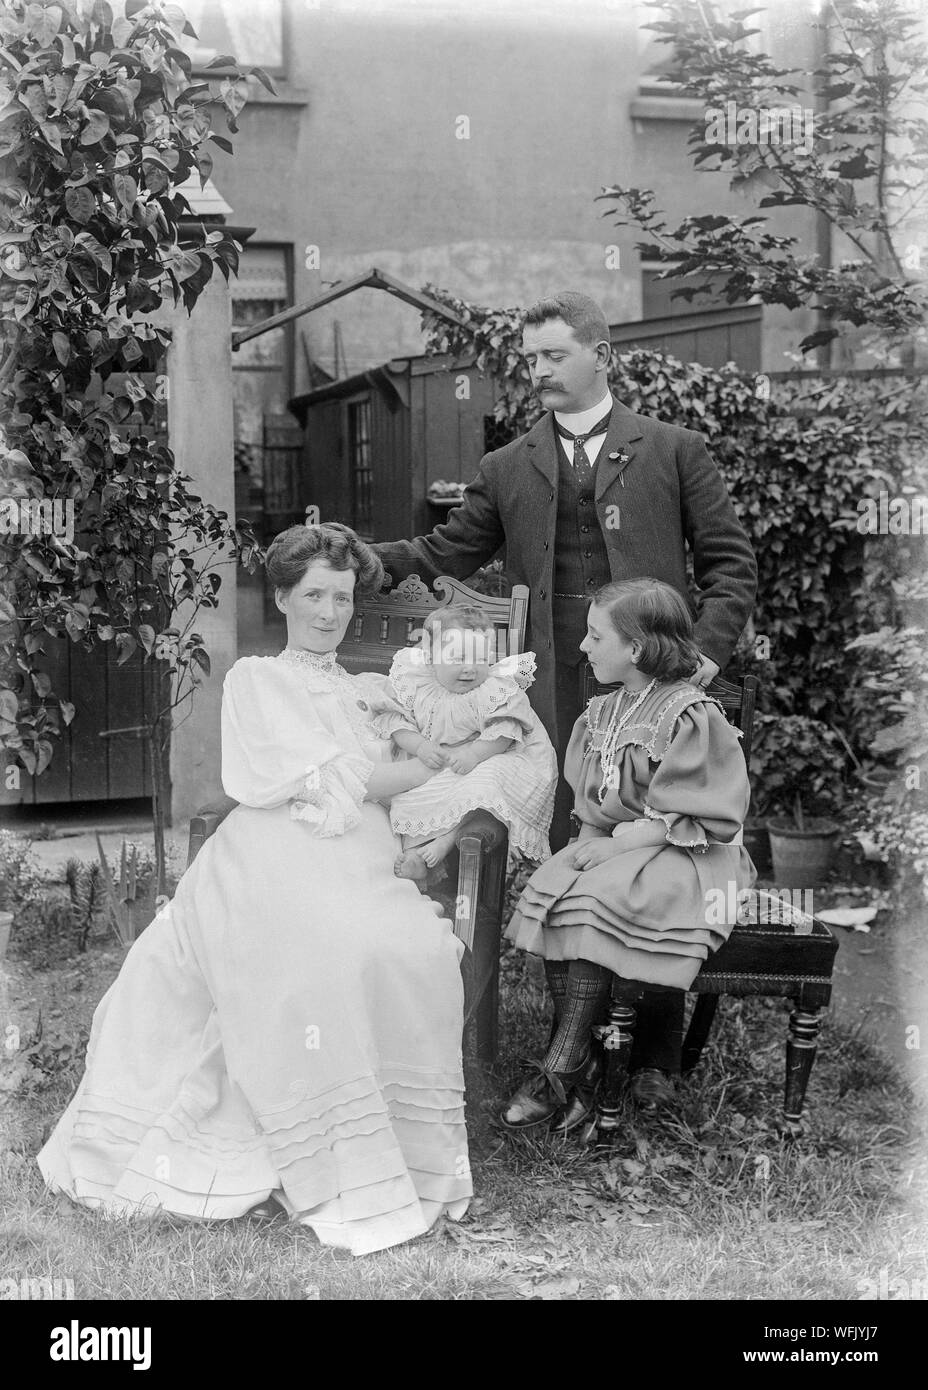 A vintage late Victorian or early Edwardian black and white photograph showing a family group of a father, mother, and two daughters, posing for the camera outdoors, in a suburban garden in England. They are wearing typical fashion of the era. Stock Photo